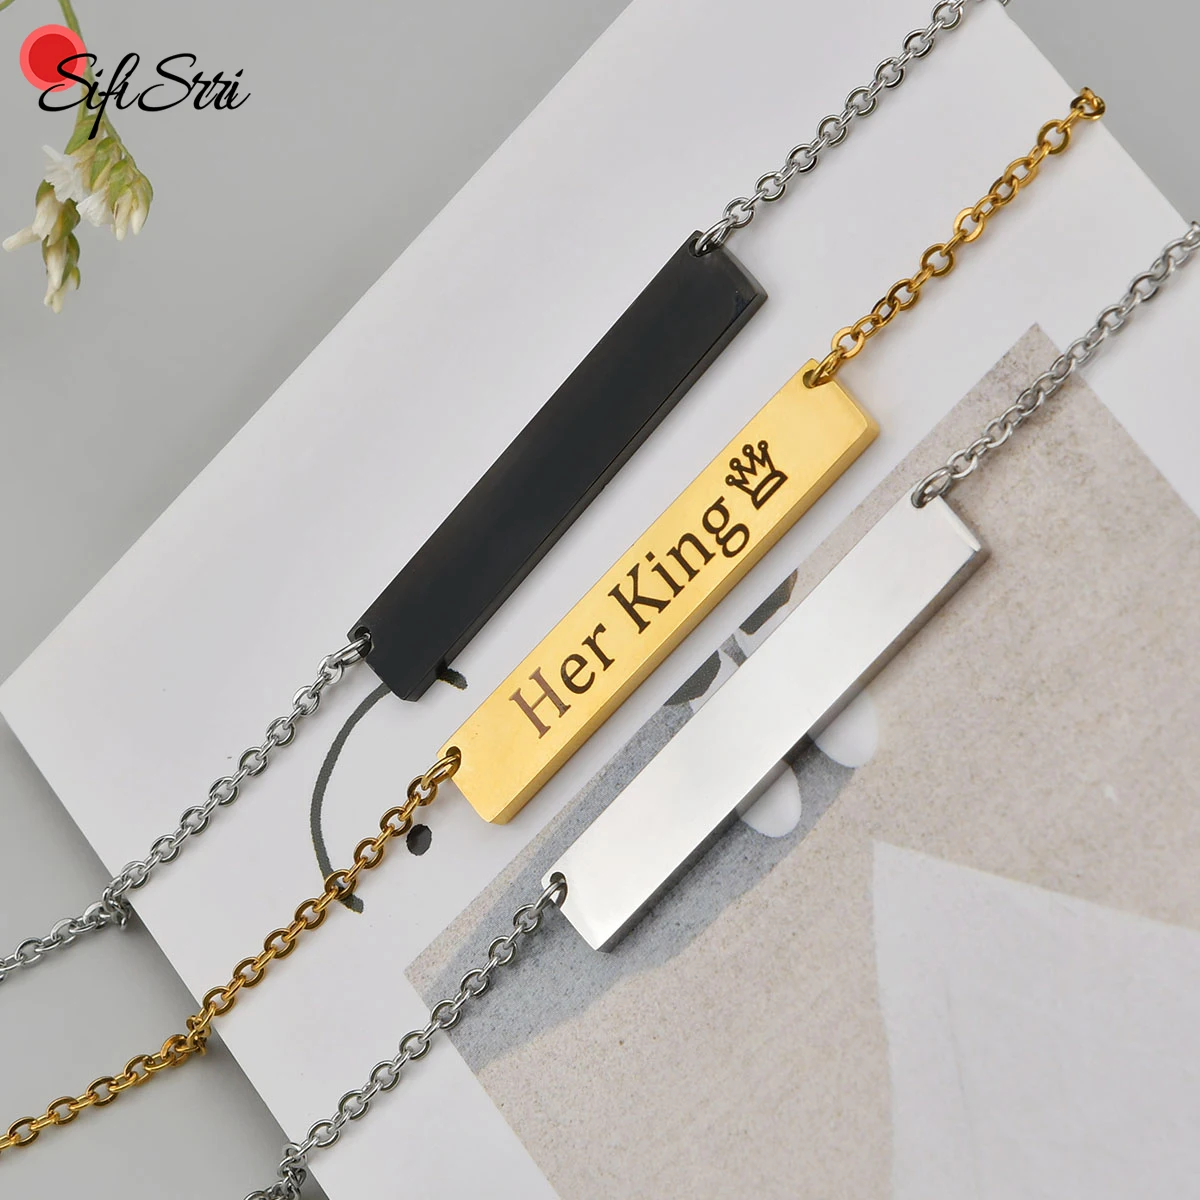 

Sifisrri Custom Stainless Steel Engrave Name ID Date Bar Necklace For Women Elegant Party Jewelry Birthday Gift Accessories